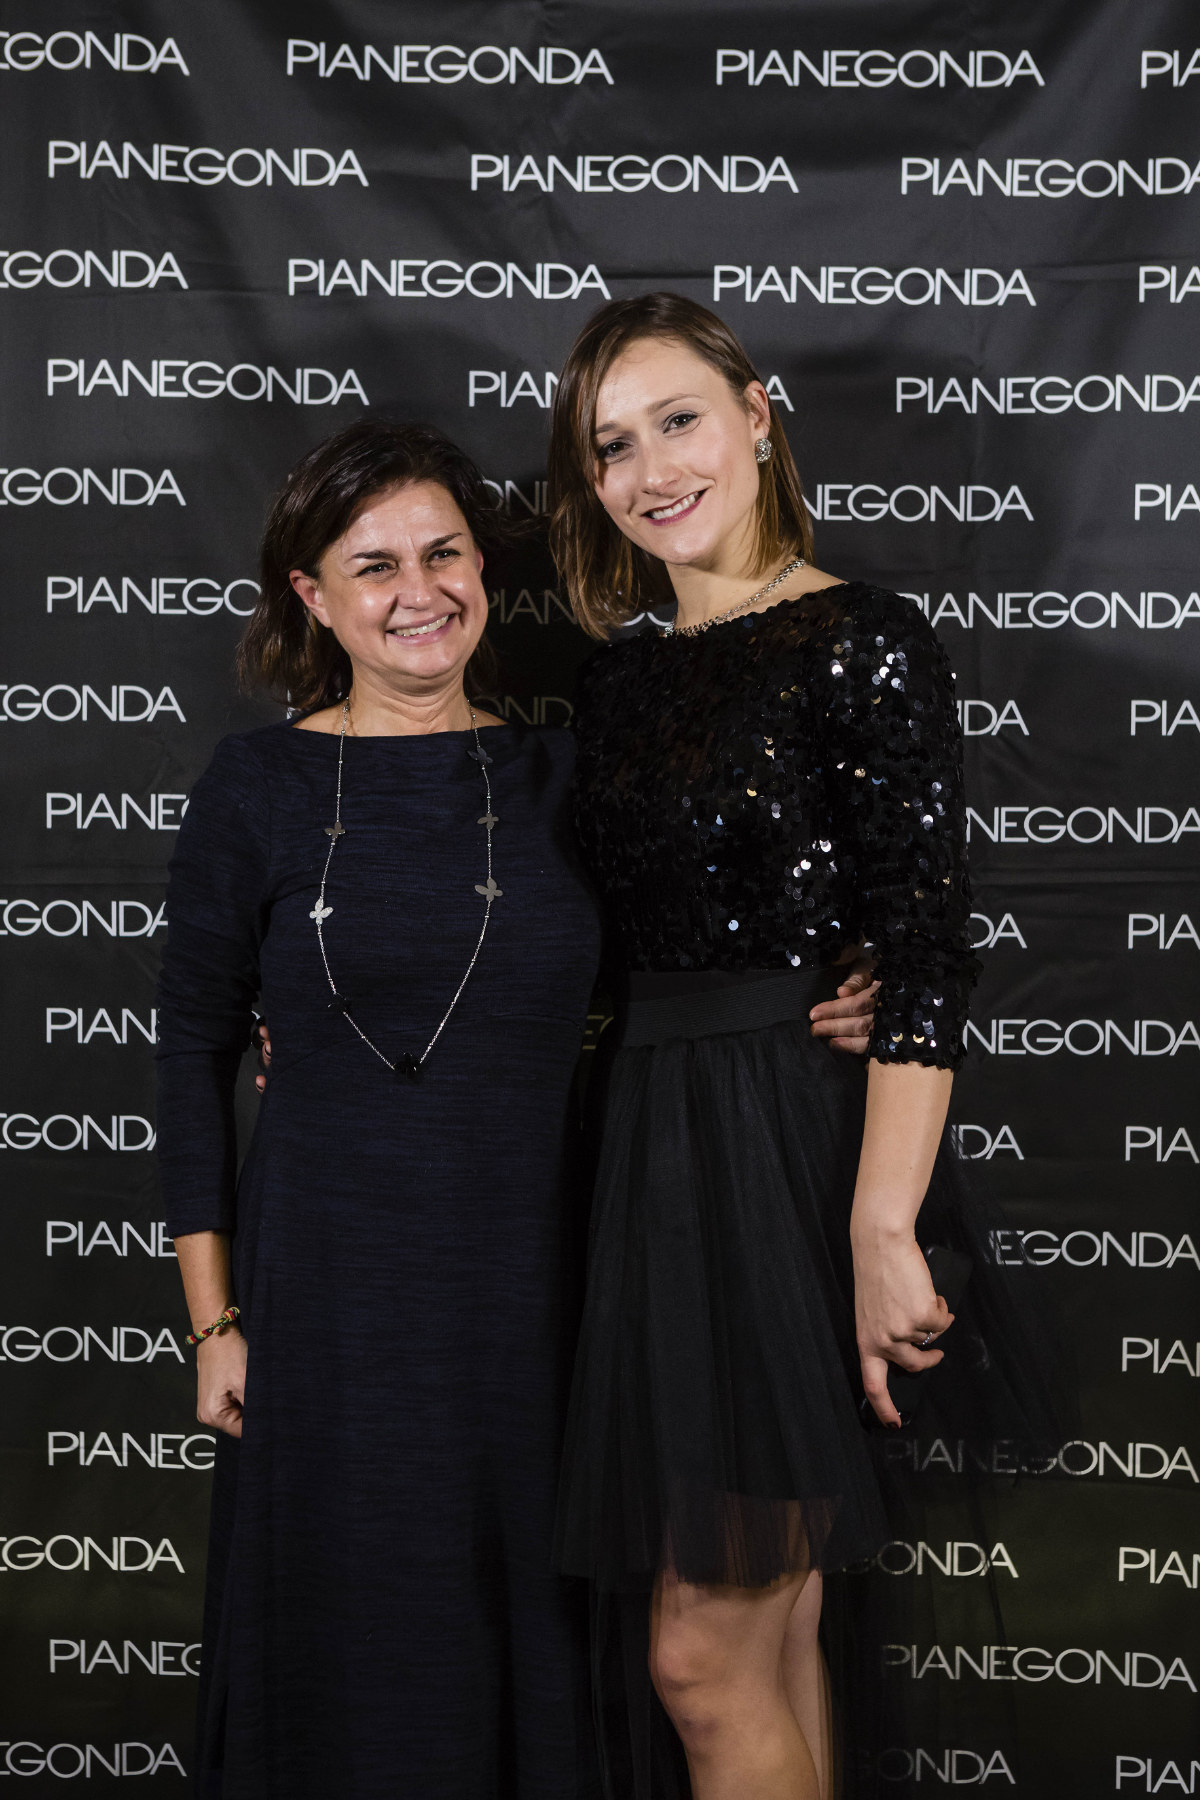 Pianegonda: Exclusive Party For The Opening Of First Flagship Store In Milan